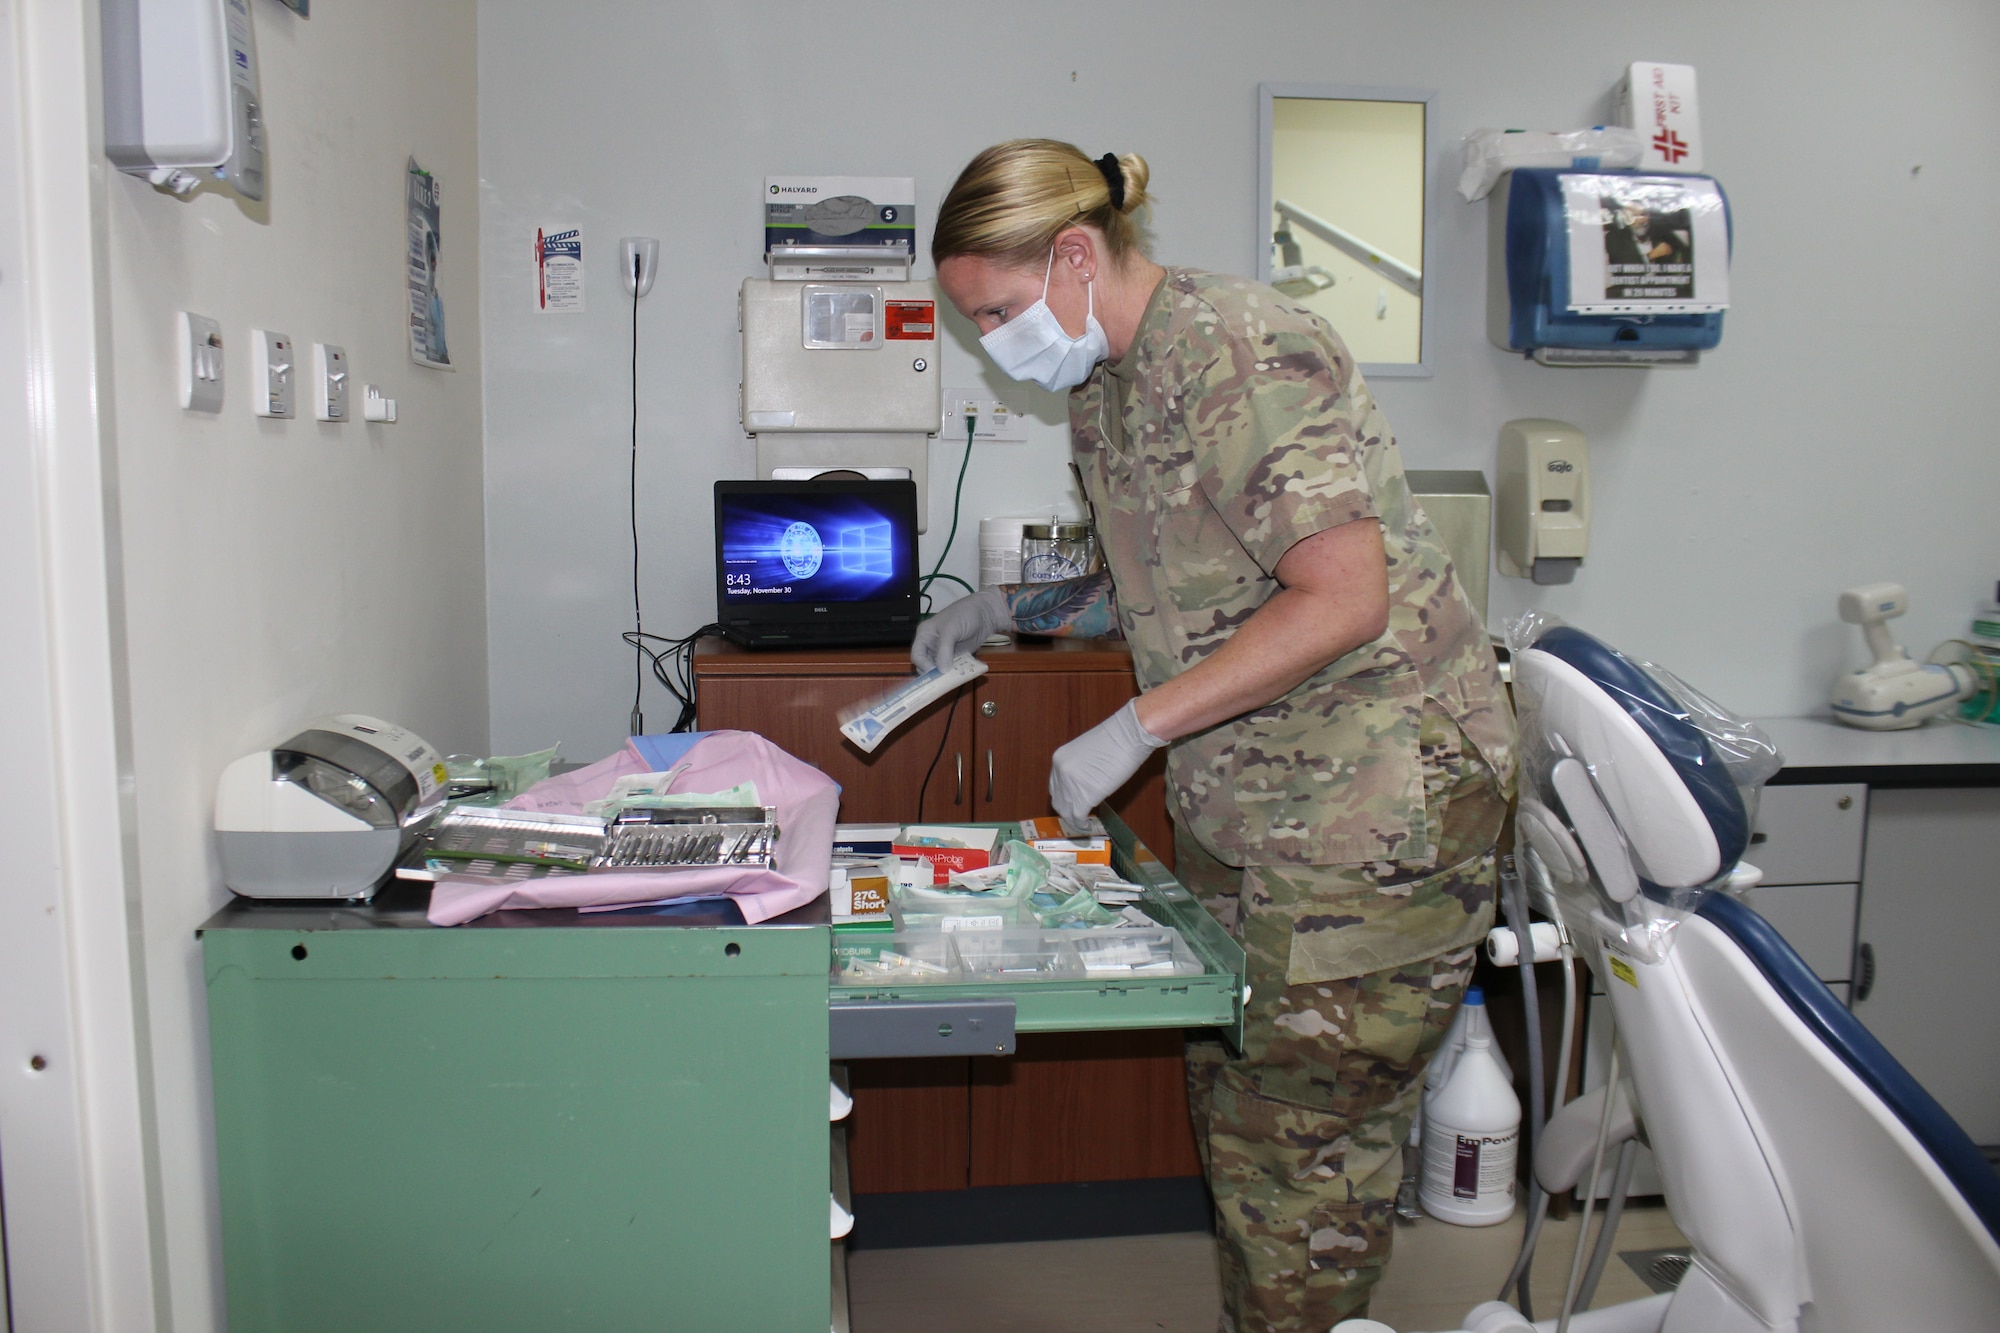 Tech. Sgt. Tiffani Lawter, a dental technician with the 380th Medical Group, prepares instruments for a dental procedure at the medical clinic at Al Dhafra Air Base, United Arab Emirates, Nov. 30, 2021. The dental office at the clinic provides emergency dental services to support the 380th Air Expeditionary Wing and other U.S. operations at the base. Lawter is forward deployed from the 131st Bomb Wing, Missouri Air National Guard.